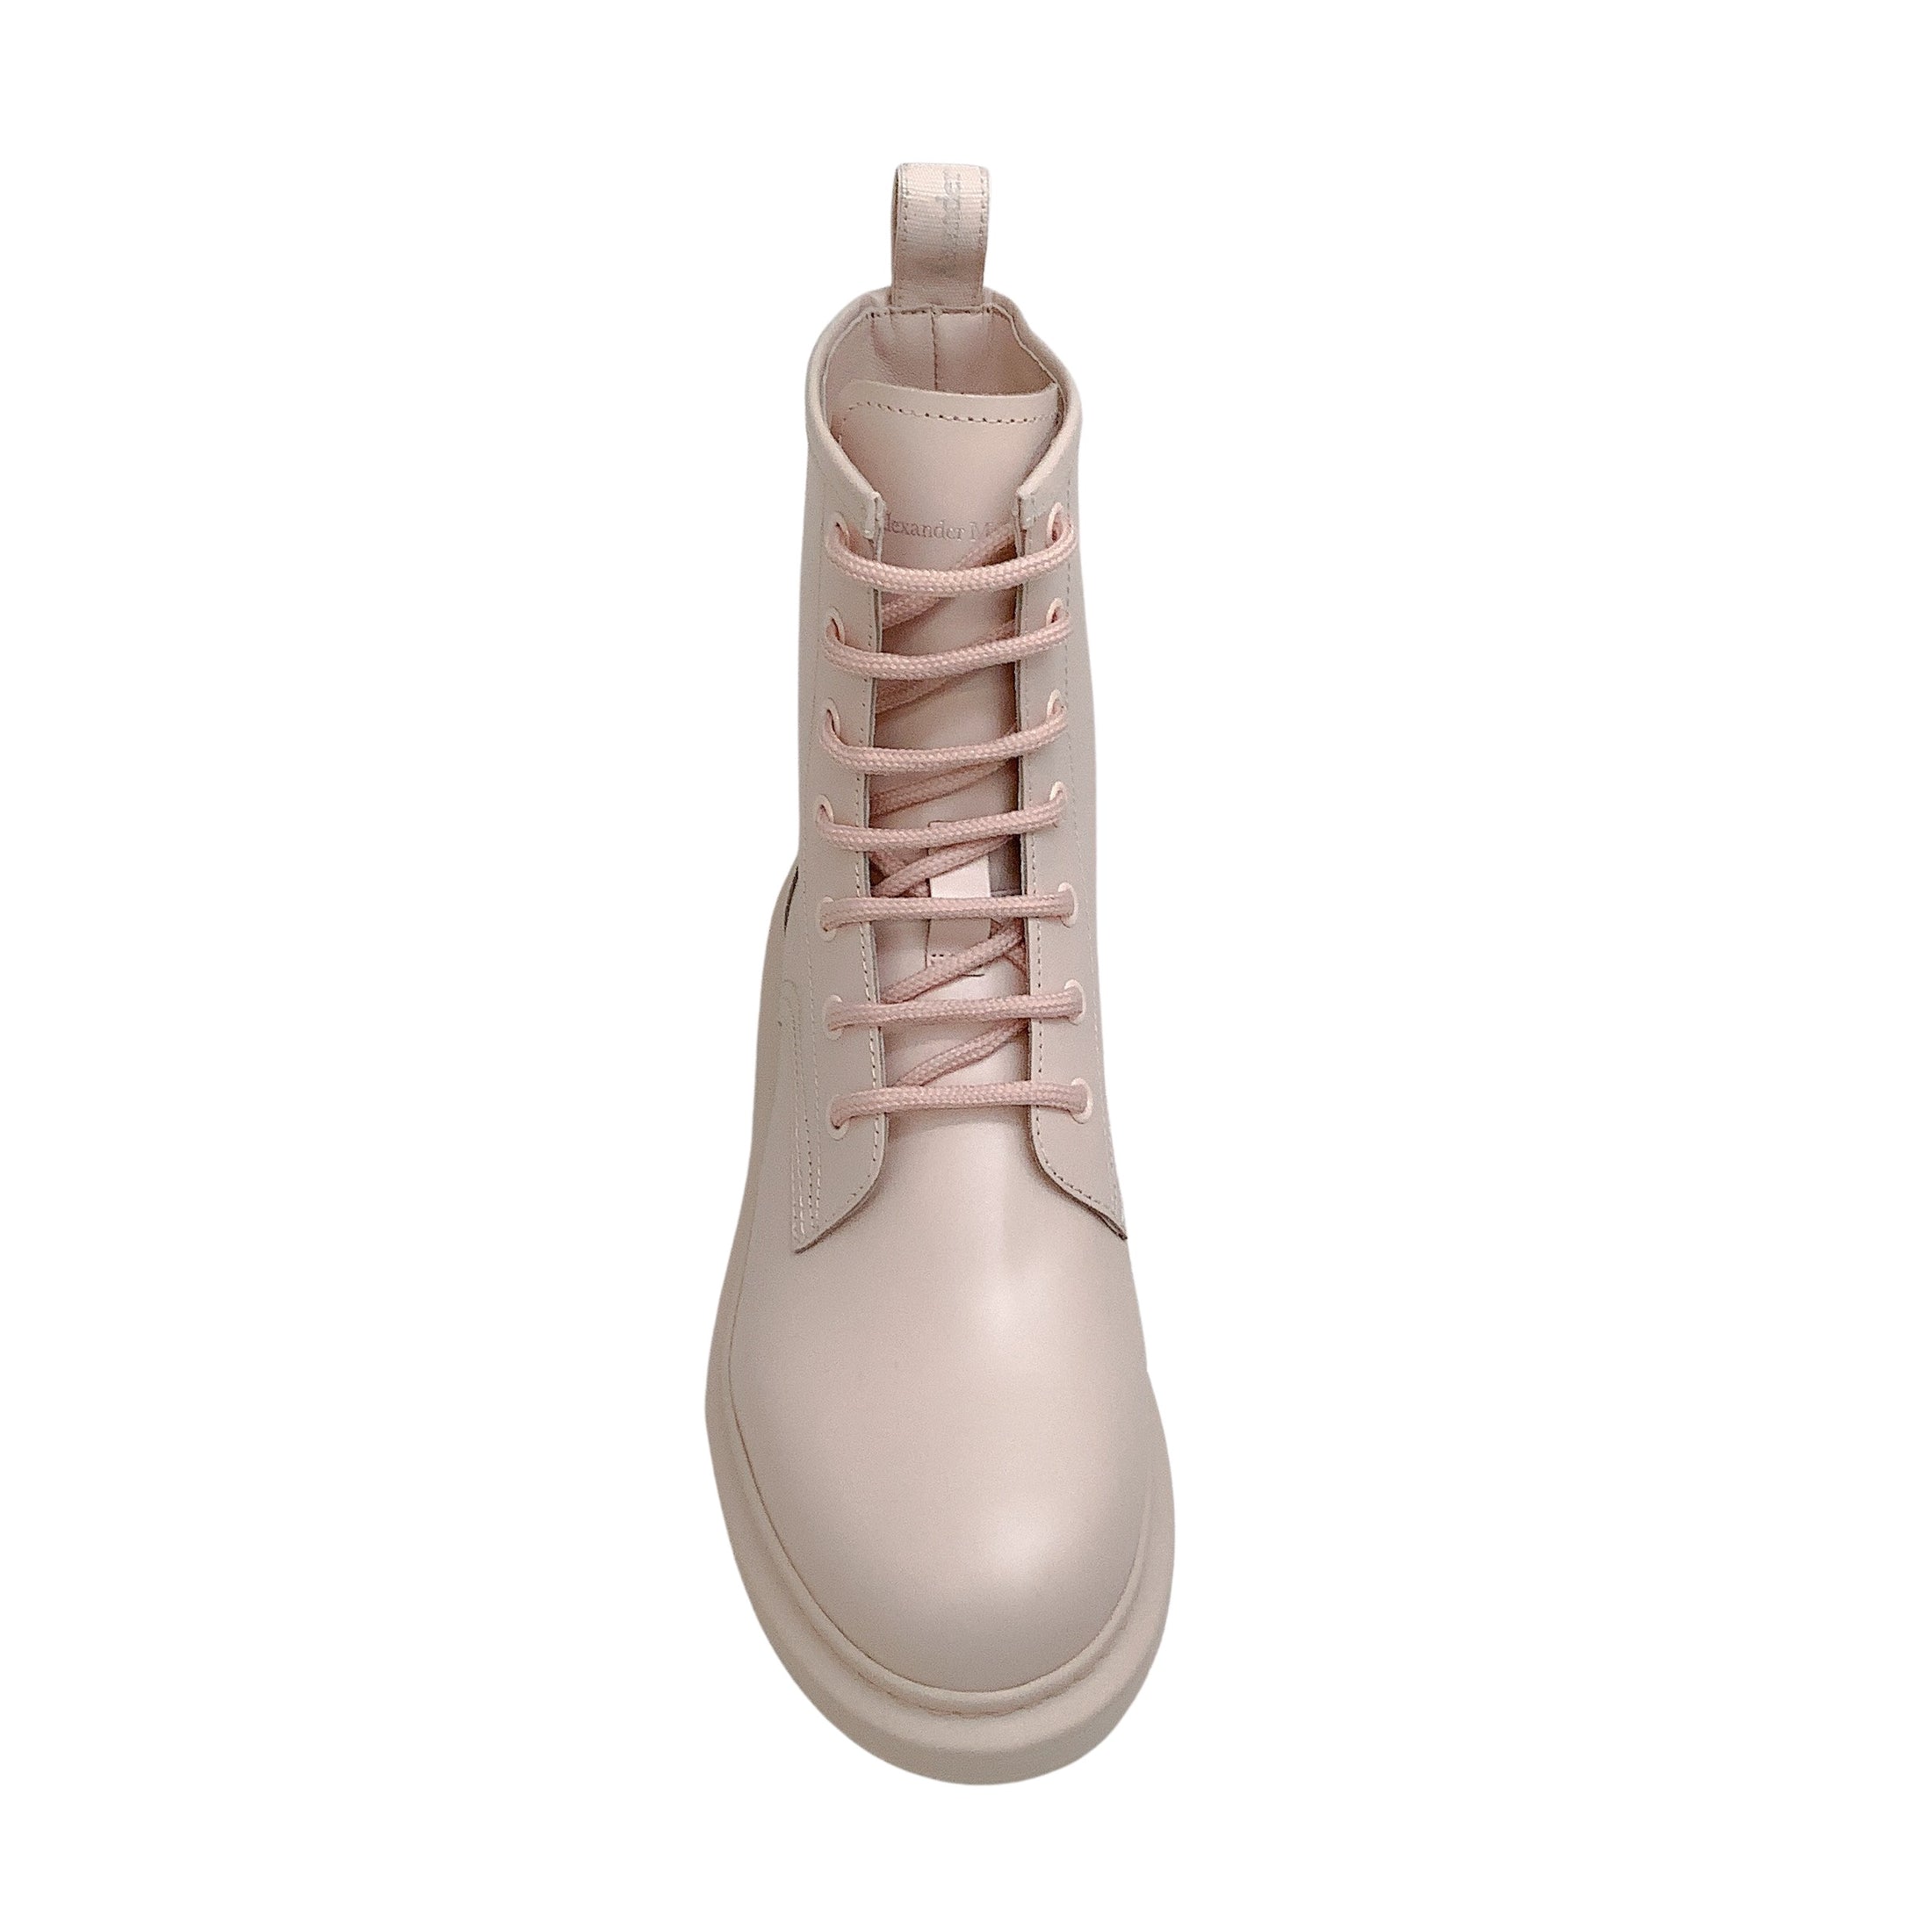 Alexander McQueen Tea Rose Pink Lace Up Booties with Rubber Soles